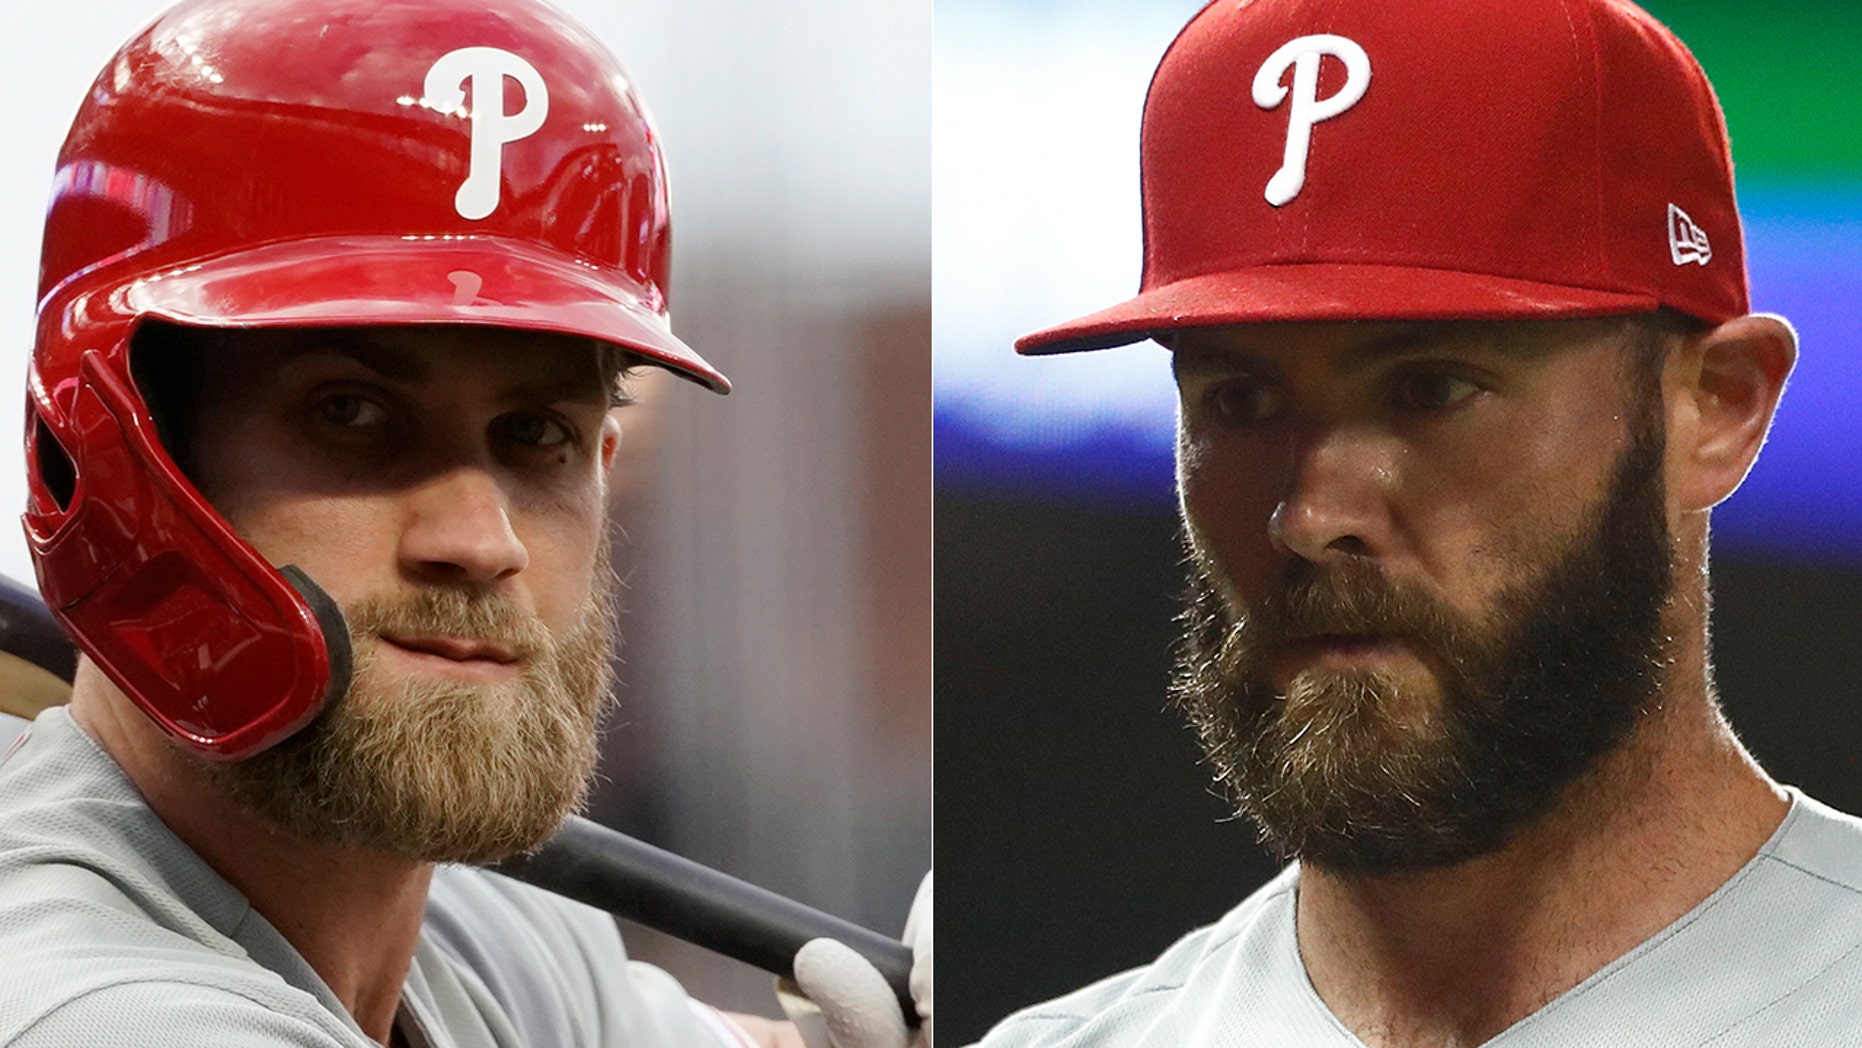 Bryce Harper was ejected Monday's game to the chagrin of Jake Arrieta.